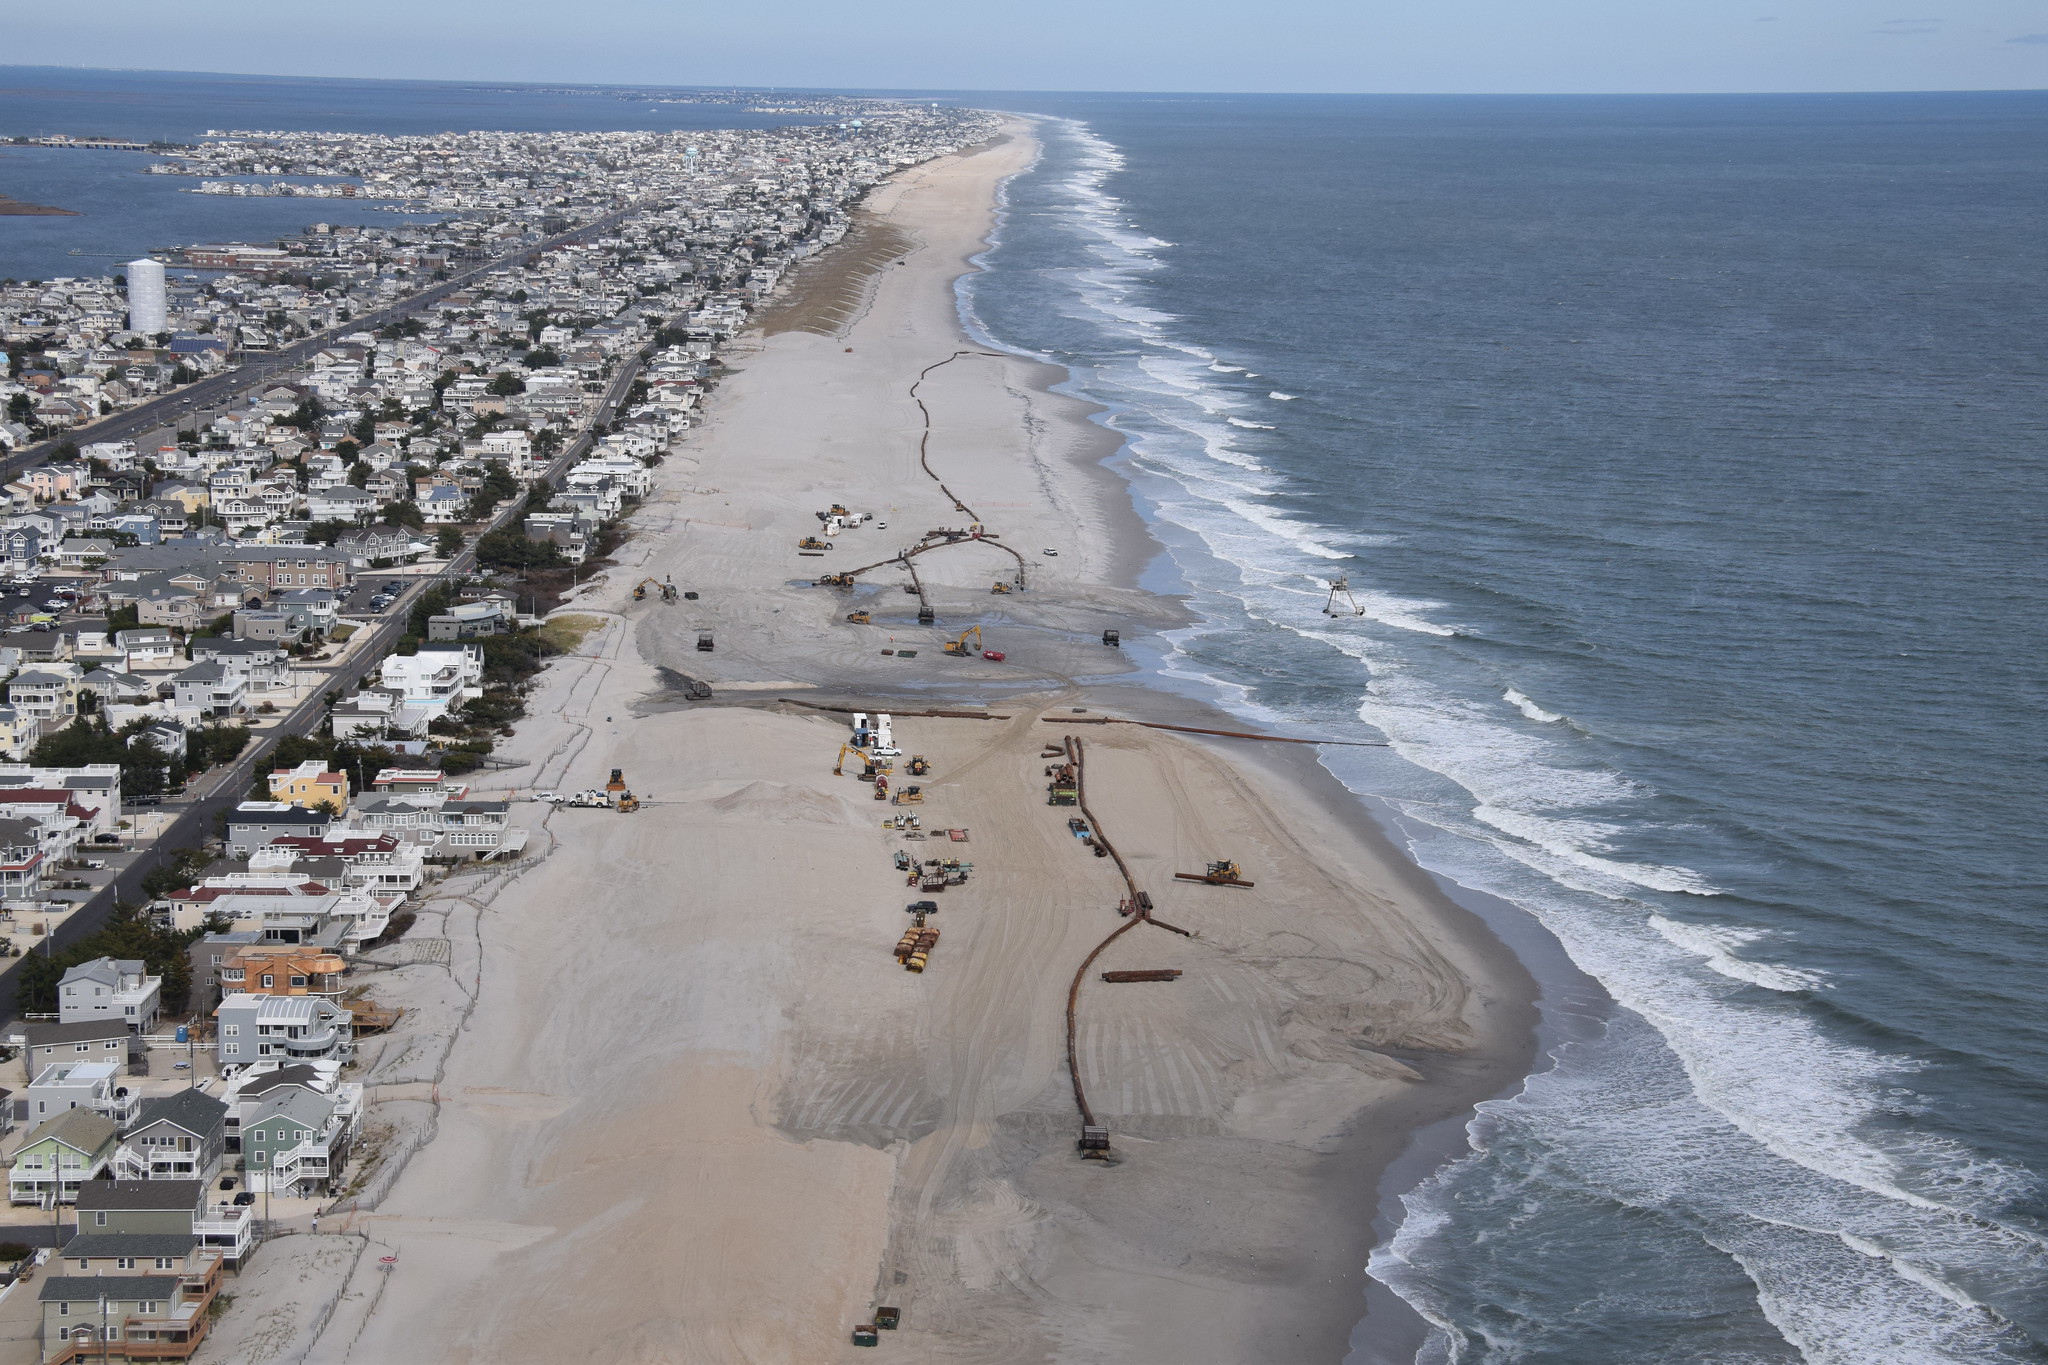 A 2015 U.S. Army Corps of Engineers project on Long Beach Island, NJ pumped more than 8 million cubic yards of offshore sand onto the beach to create a dune and berm system designed to reduce storm damages (Courtesy of U.S. Army Corps of Engineers, public domain, via Flickr).